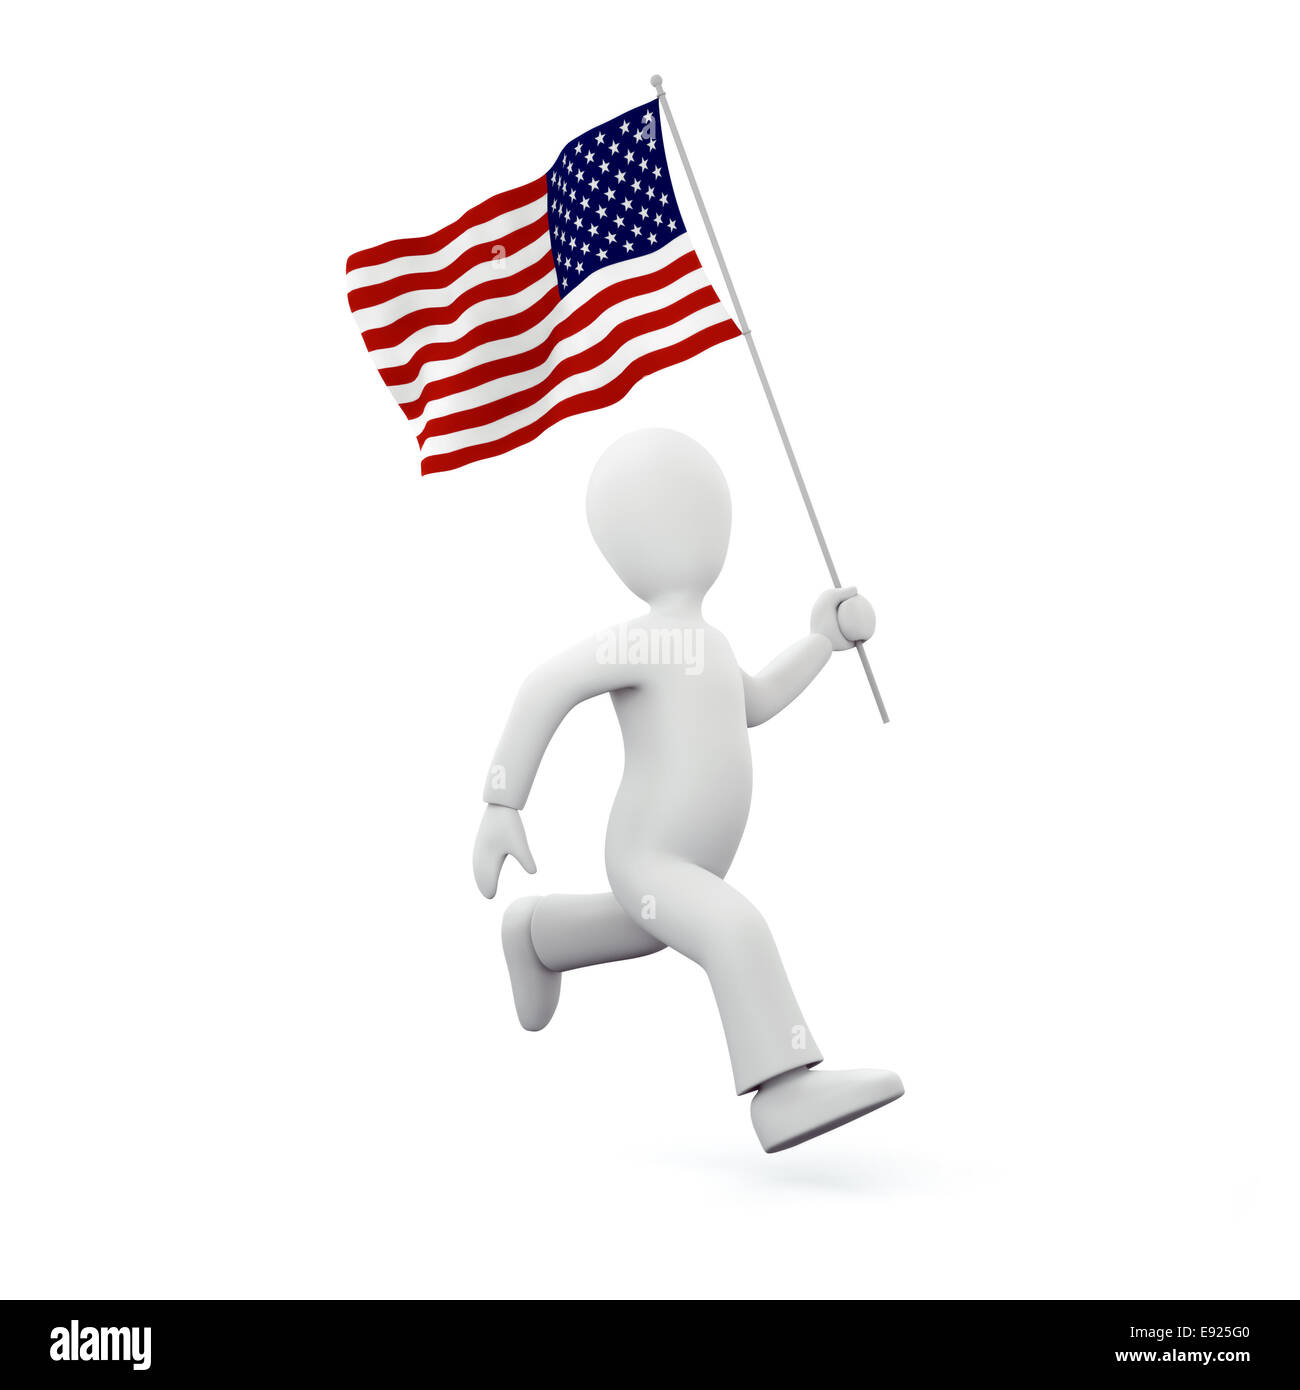 Holding an american flag Stock Photo